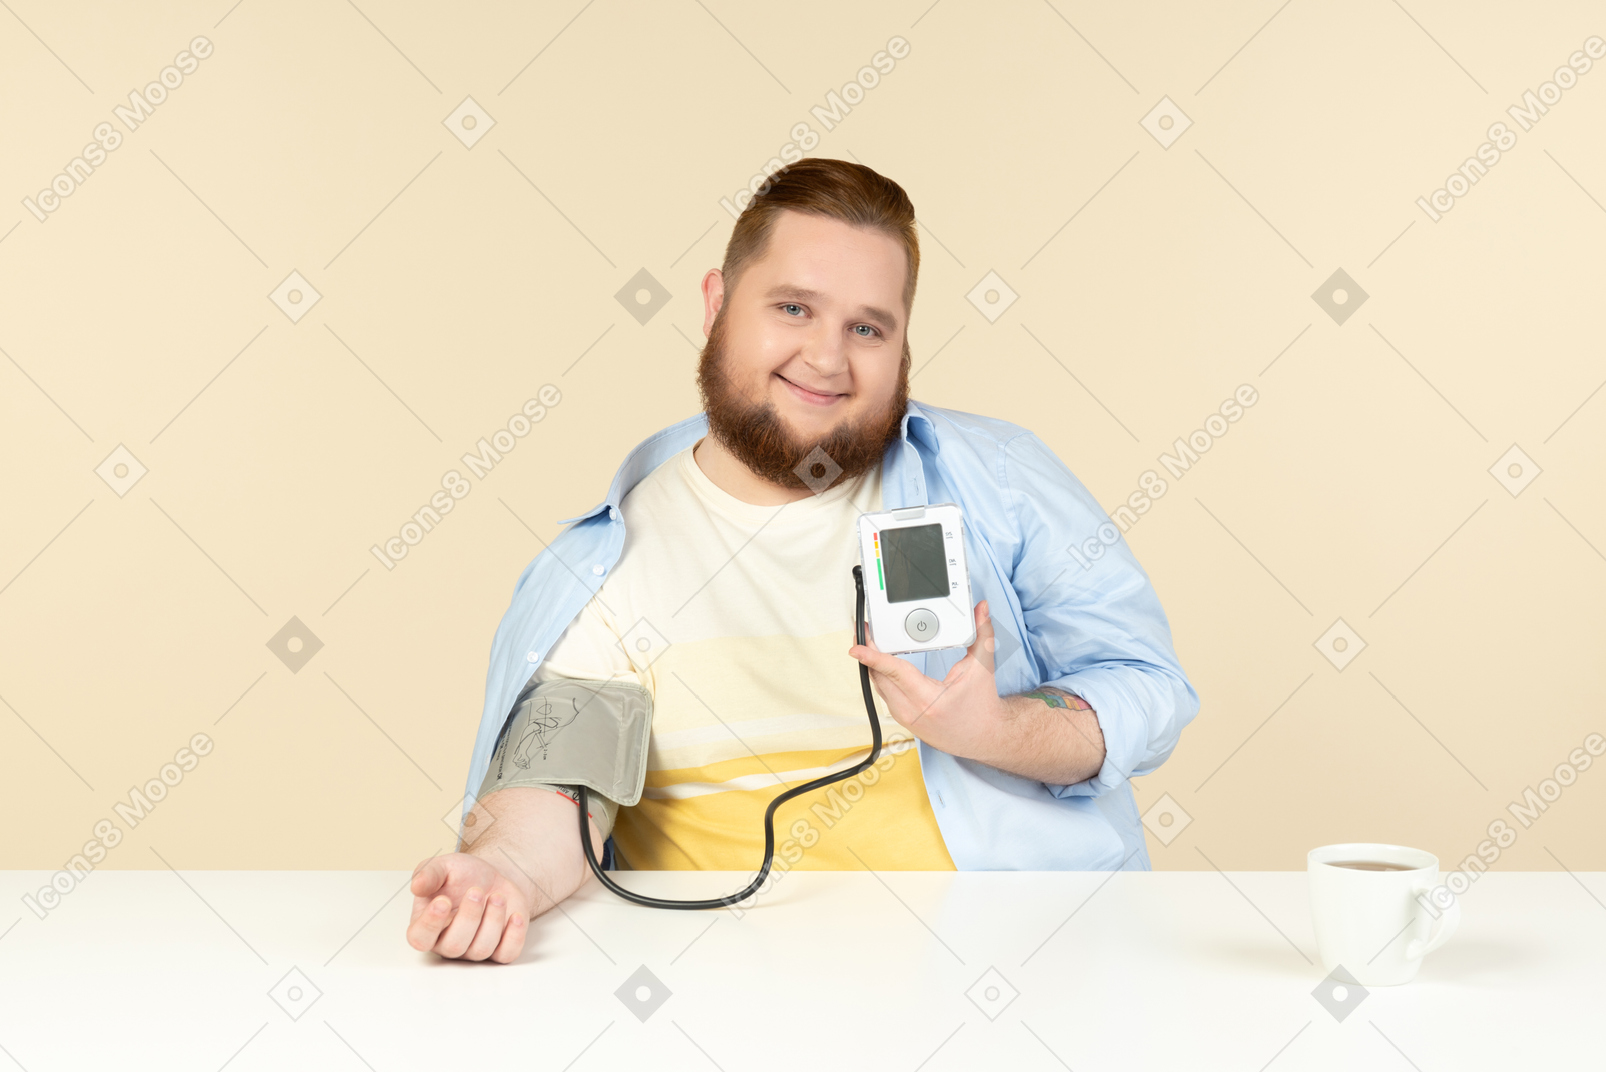 Smiling young overweight man checking blood pressure